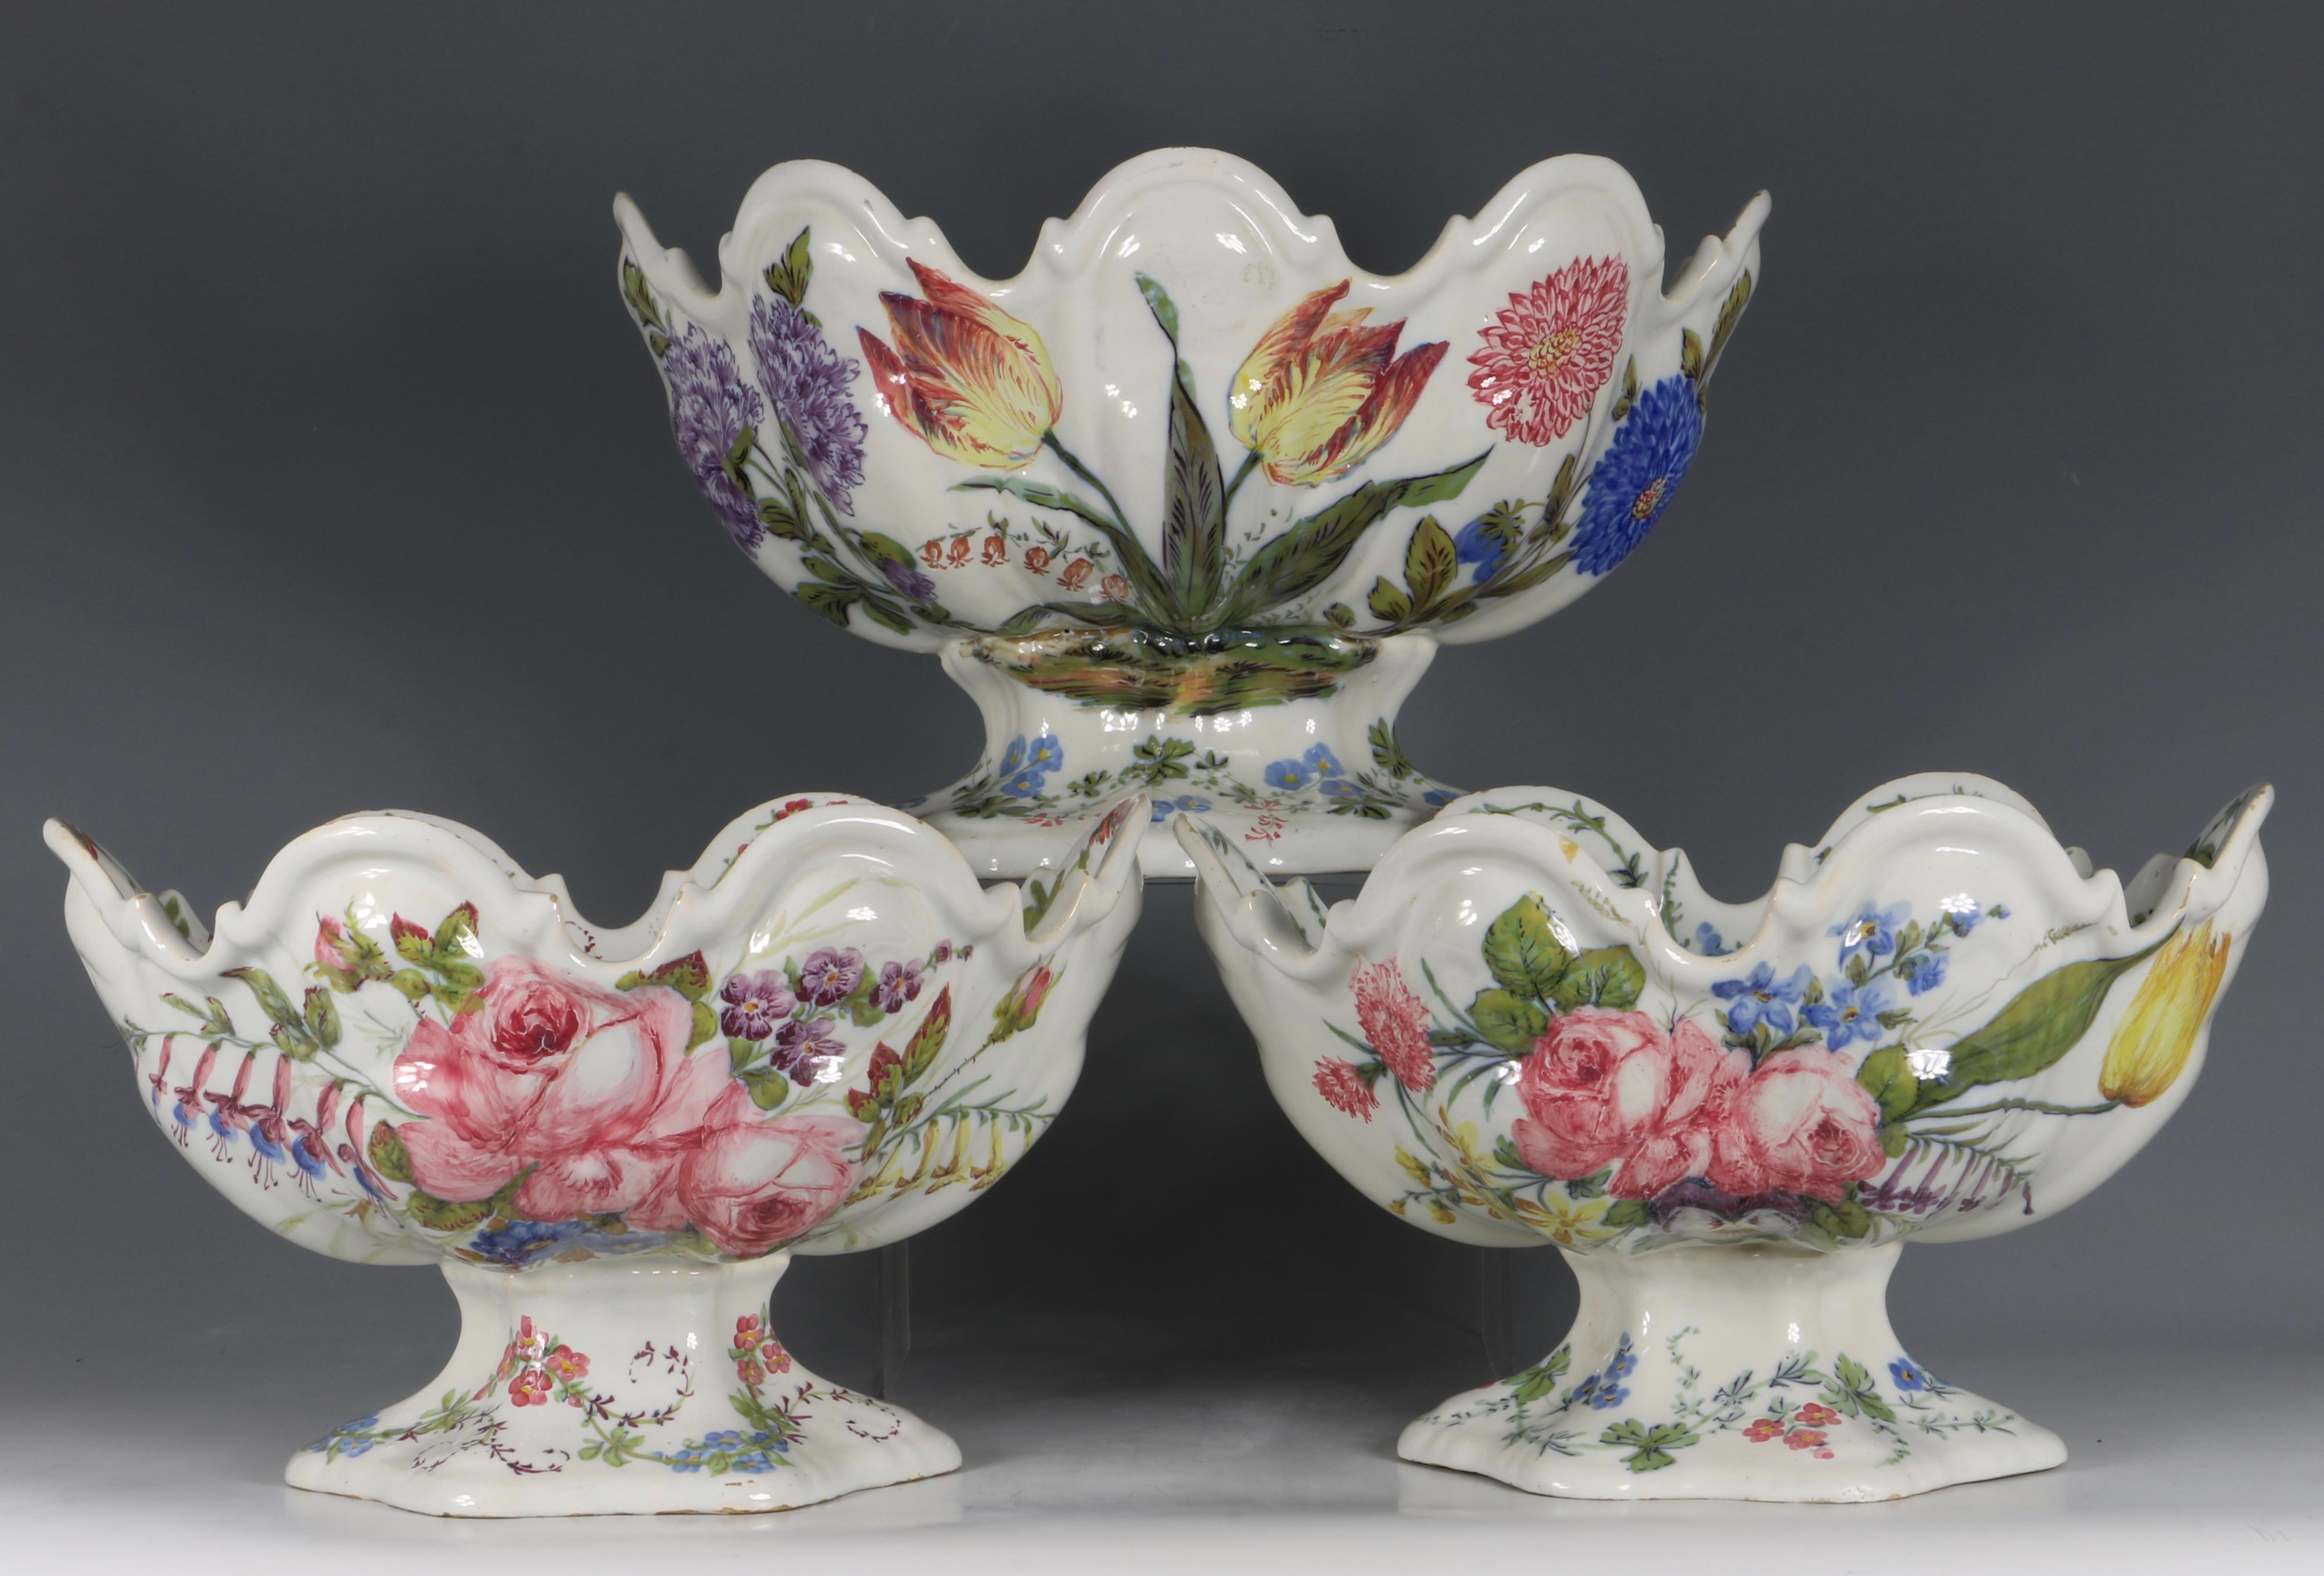 A Set of Three Nove Faience Monteiths.

Each very well painted with various bouquets of flowers

Italian Nove, mid-19th century

The largest is 11 1/4? (28.6 cm)

The smaller pair are 9 1/2? (24.3 cm).